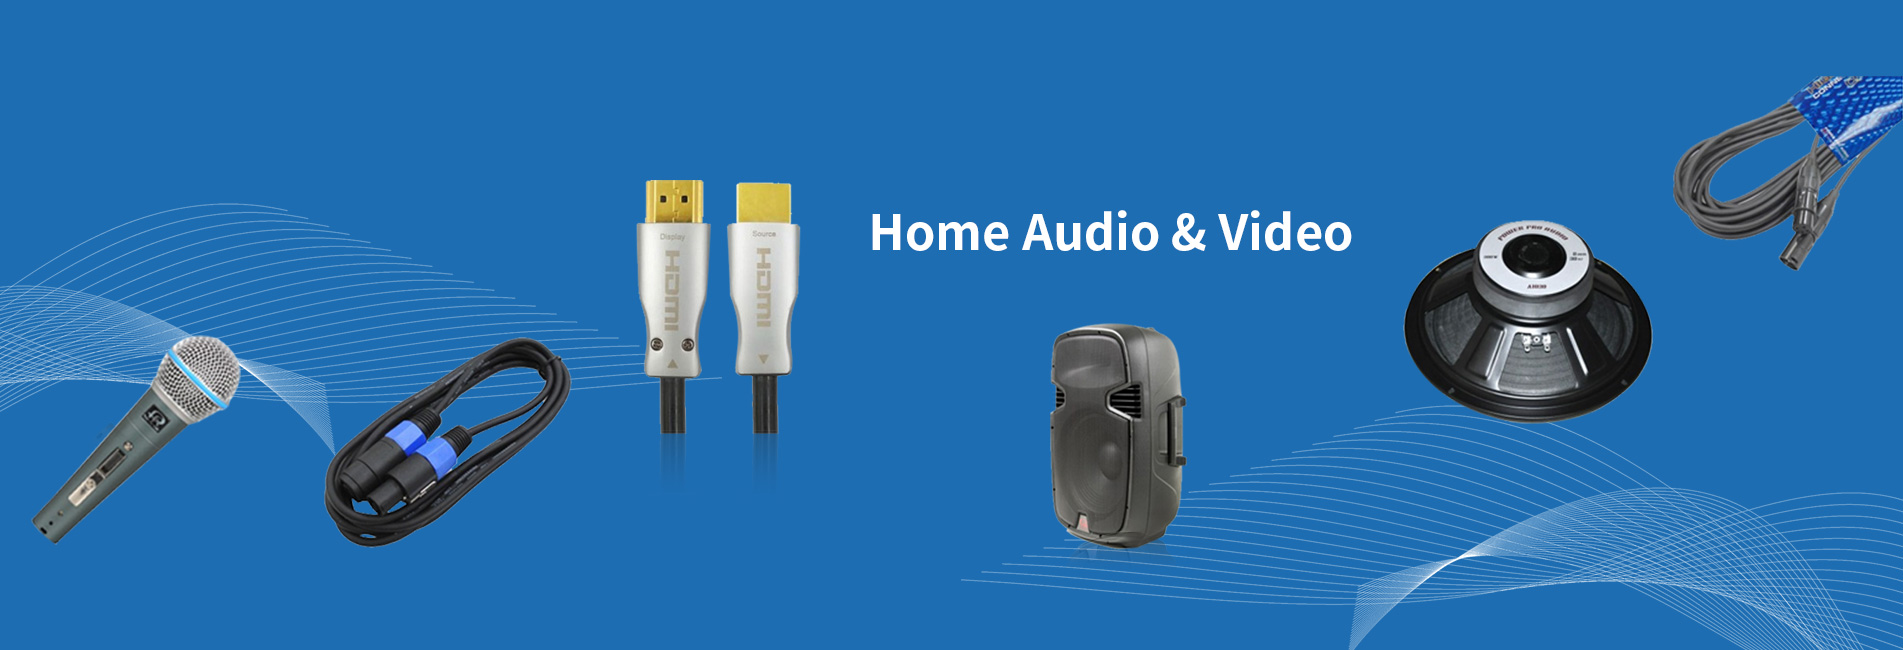 Home Audio & Video banner_2